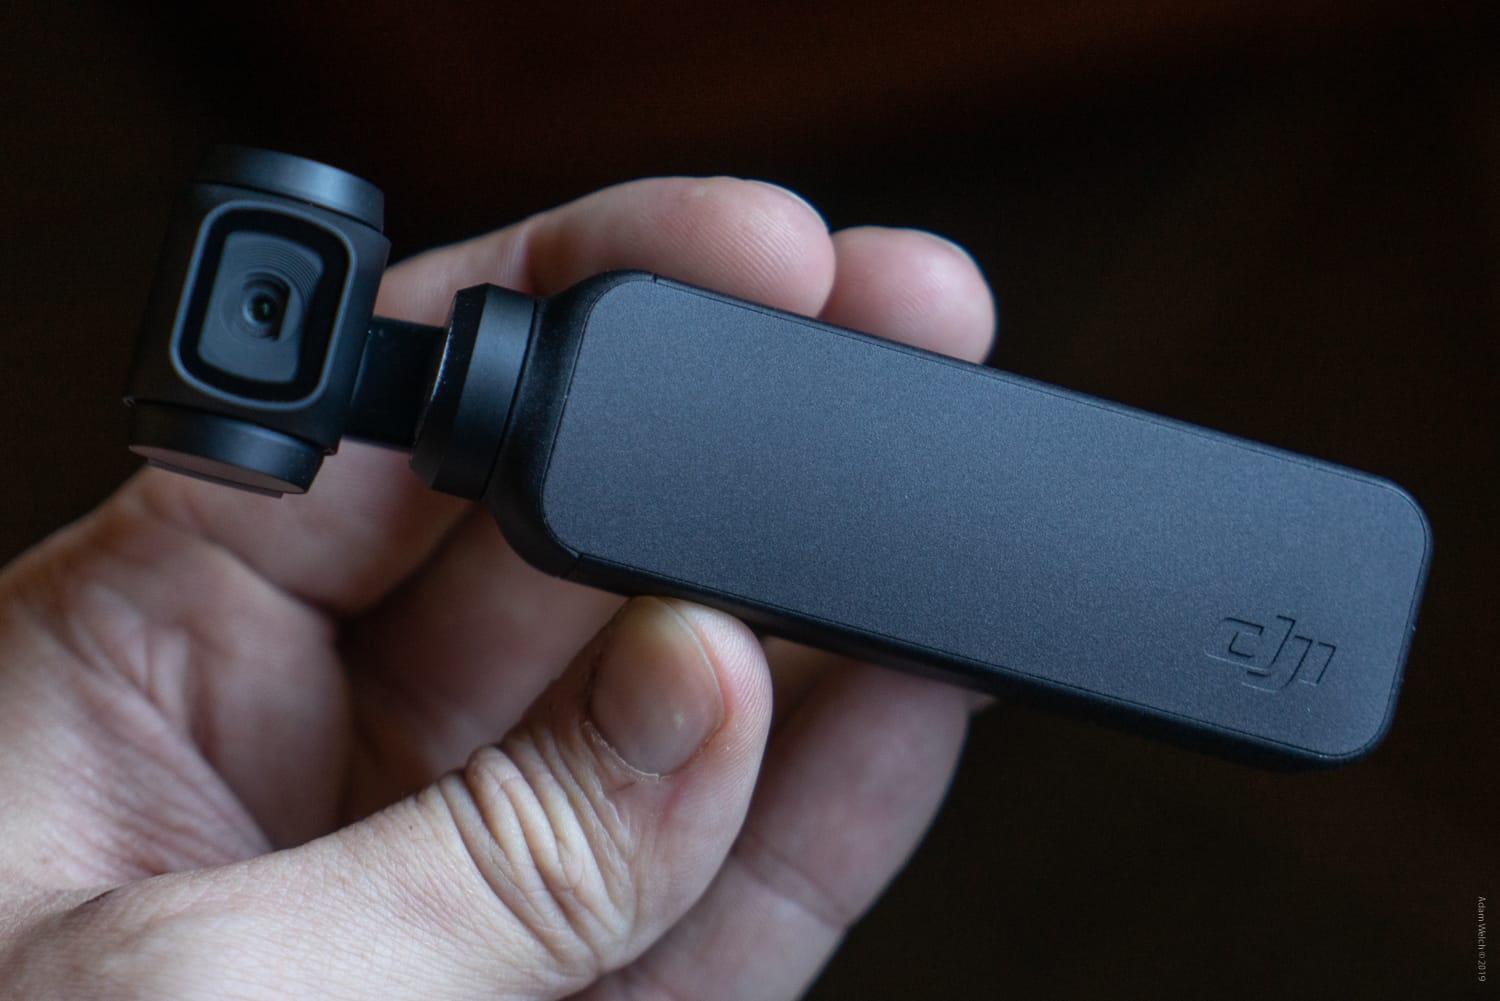 Review of the DJI Osmo Pocket